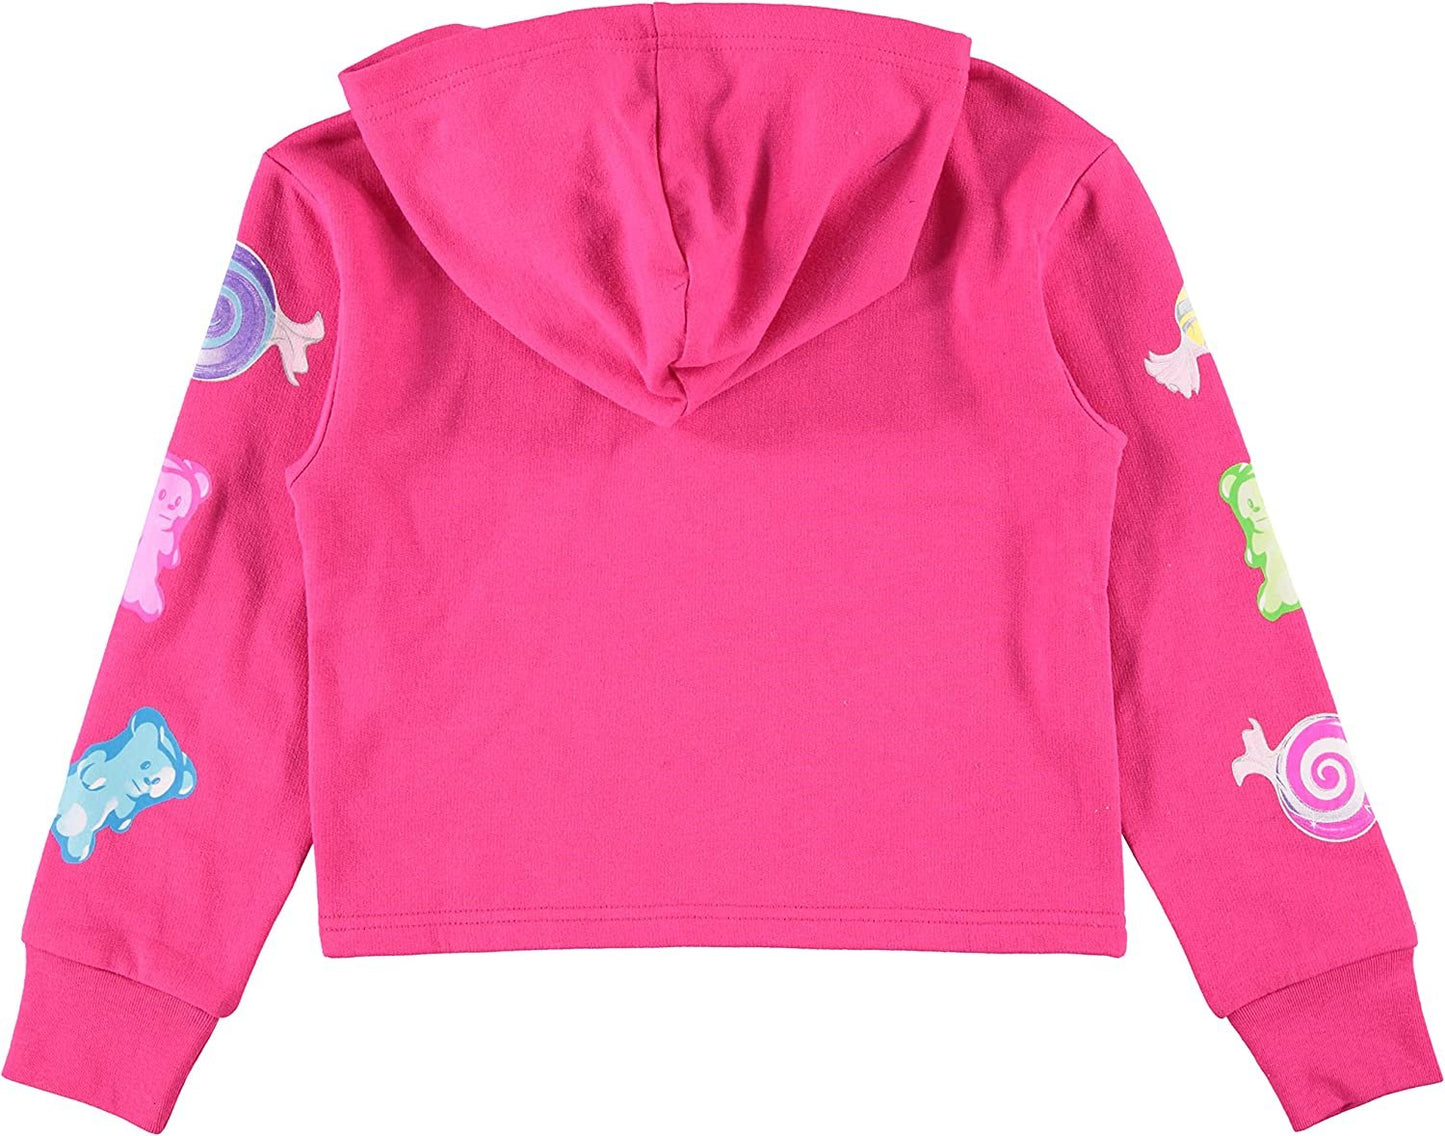 L.O.L. Surprise! Girls All Over Print Hoodie- Raw Edge Skimmer Hoodie Sizes 4-20